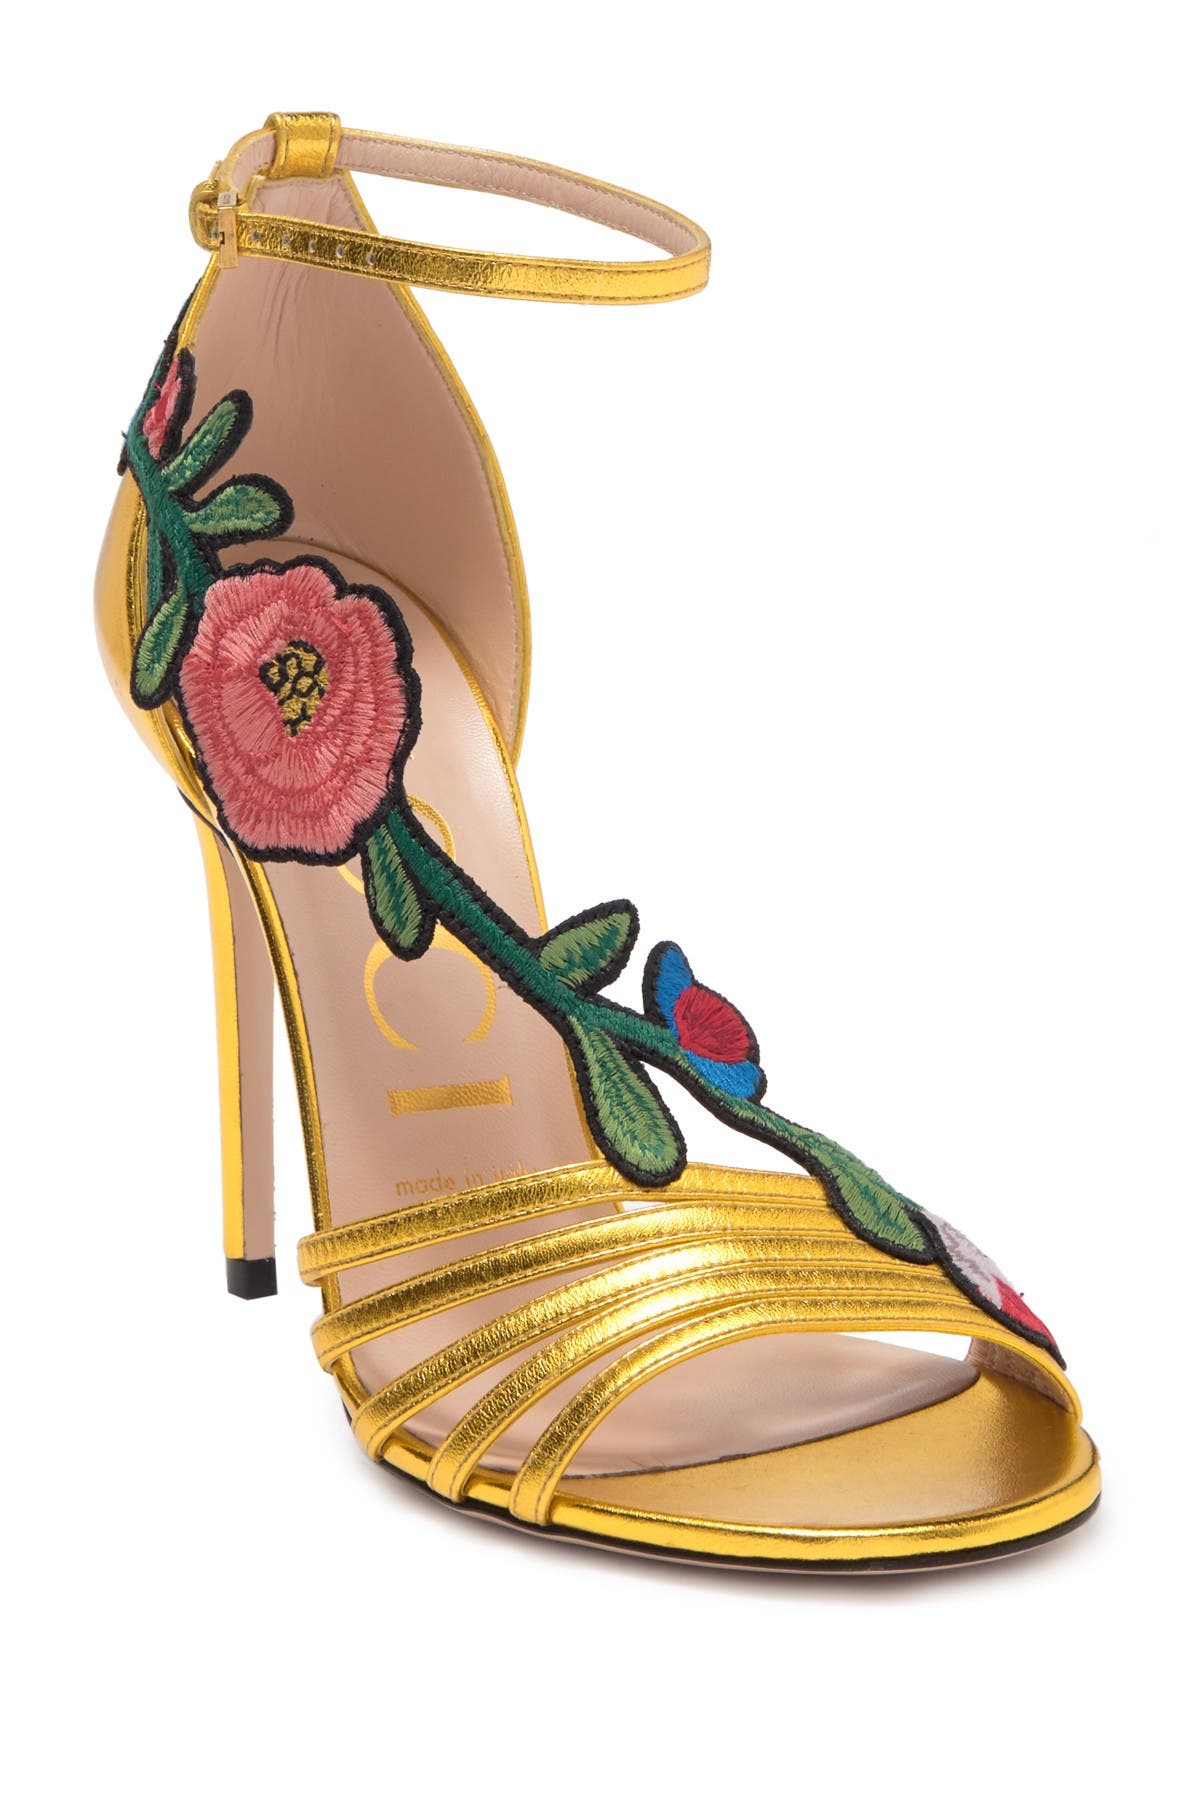 GUCCI | Ophelia Floral Metallic Leather 